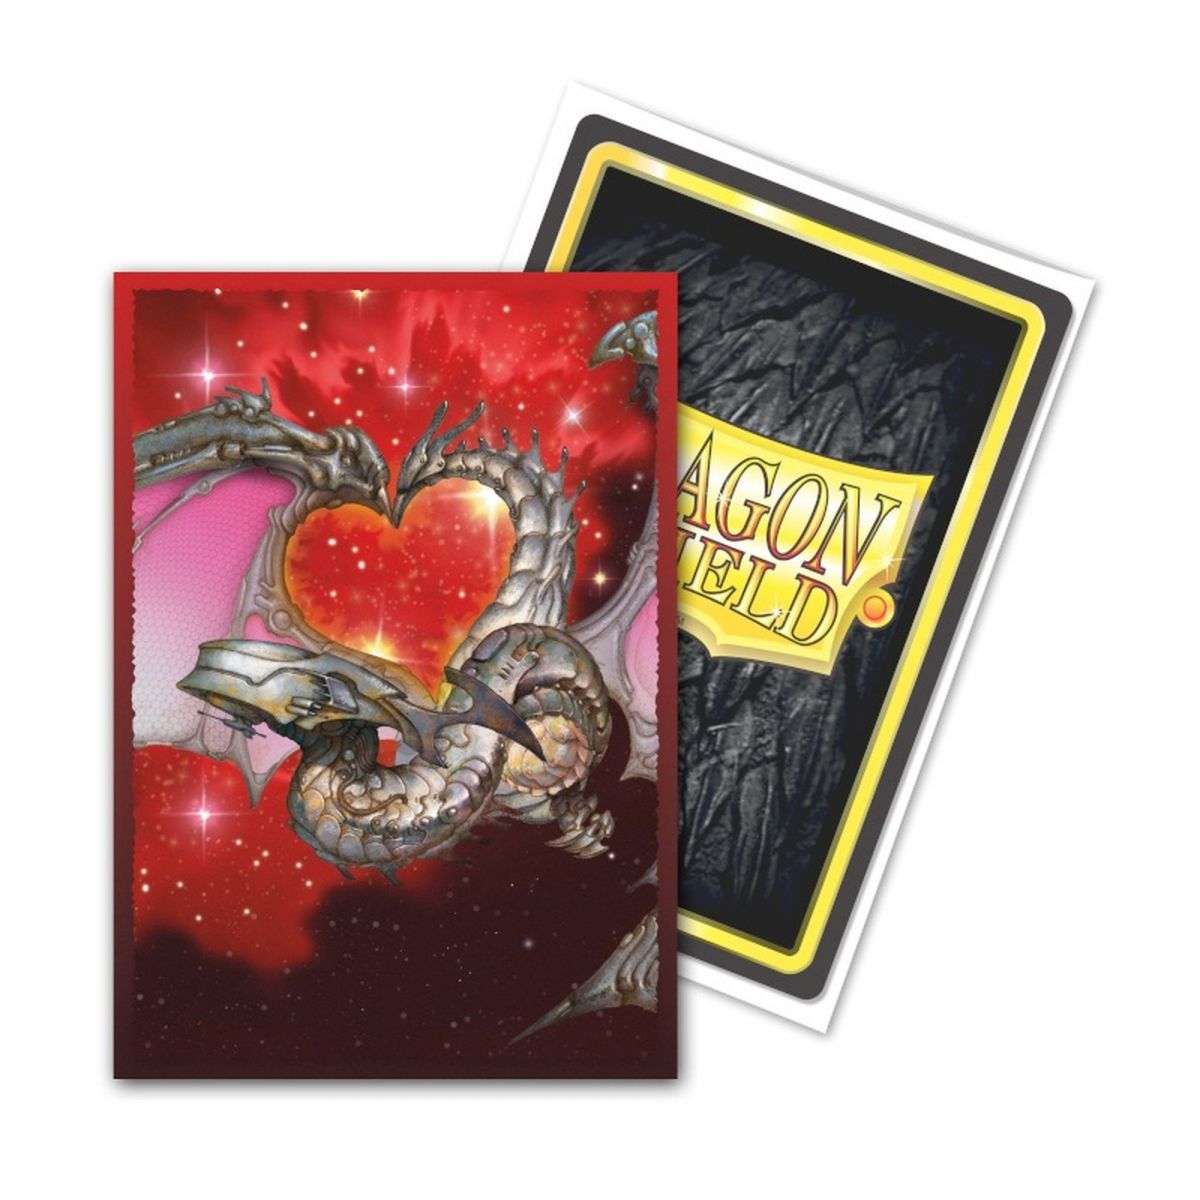 Dragon Shield Small Sleeves – Brushed Art Matte Valentine 2022 (60)